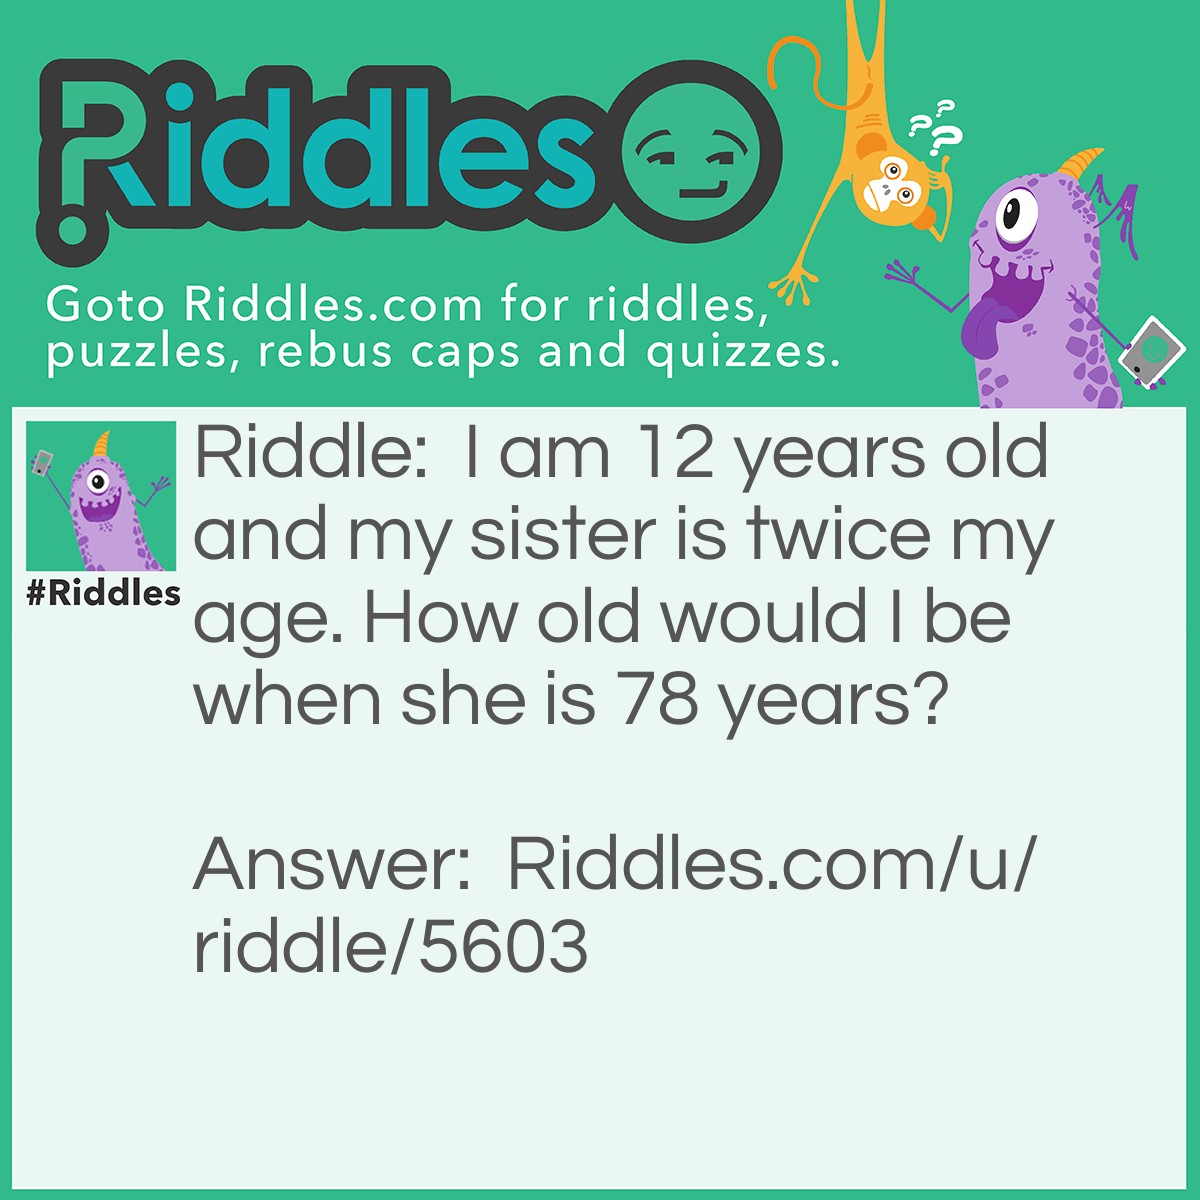 Riddle: I am 12 years old and my sister is twice my age. How old would I be when she is 78 years? Answer: I would be 66. because I am 12 years younger than her, so subtract 12 from 78. 78-12=66.